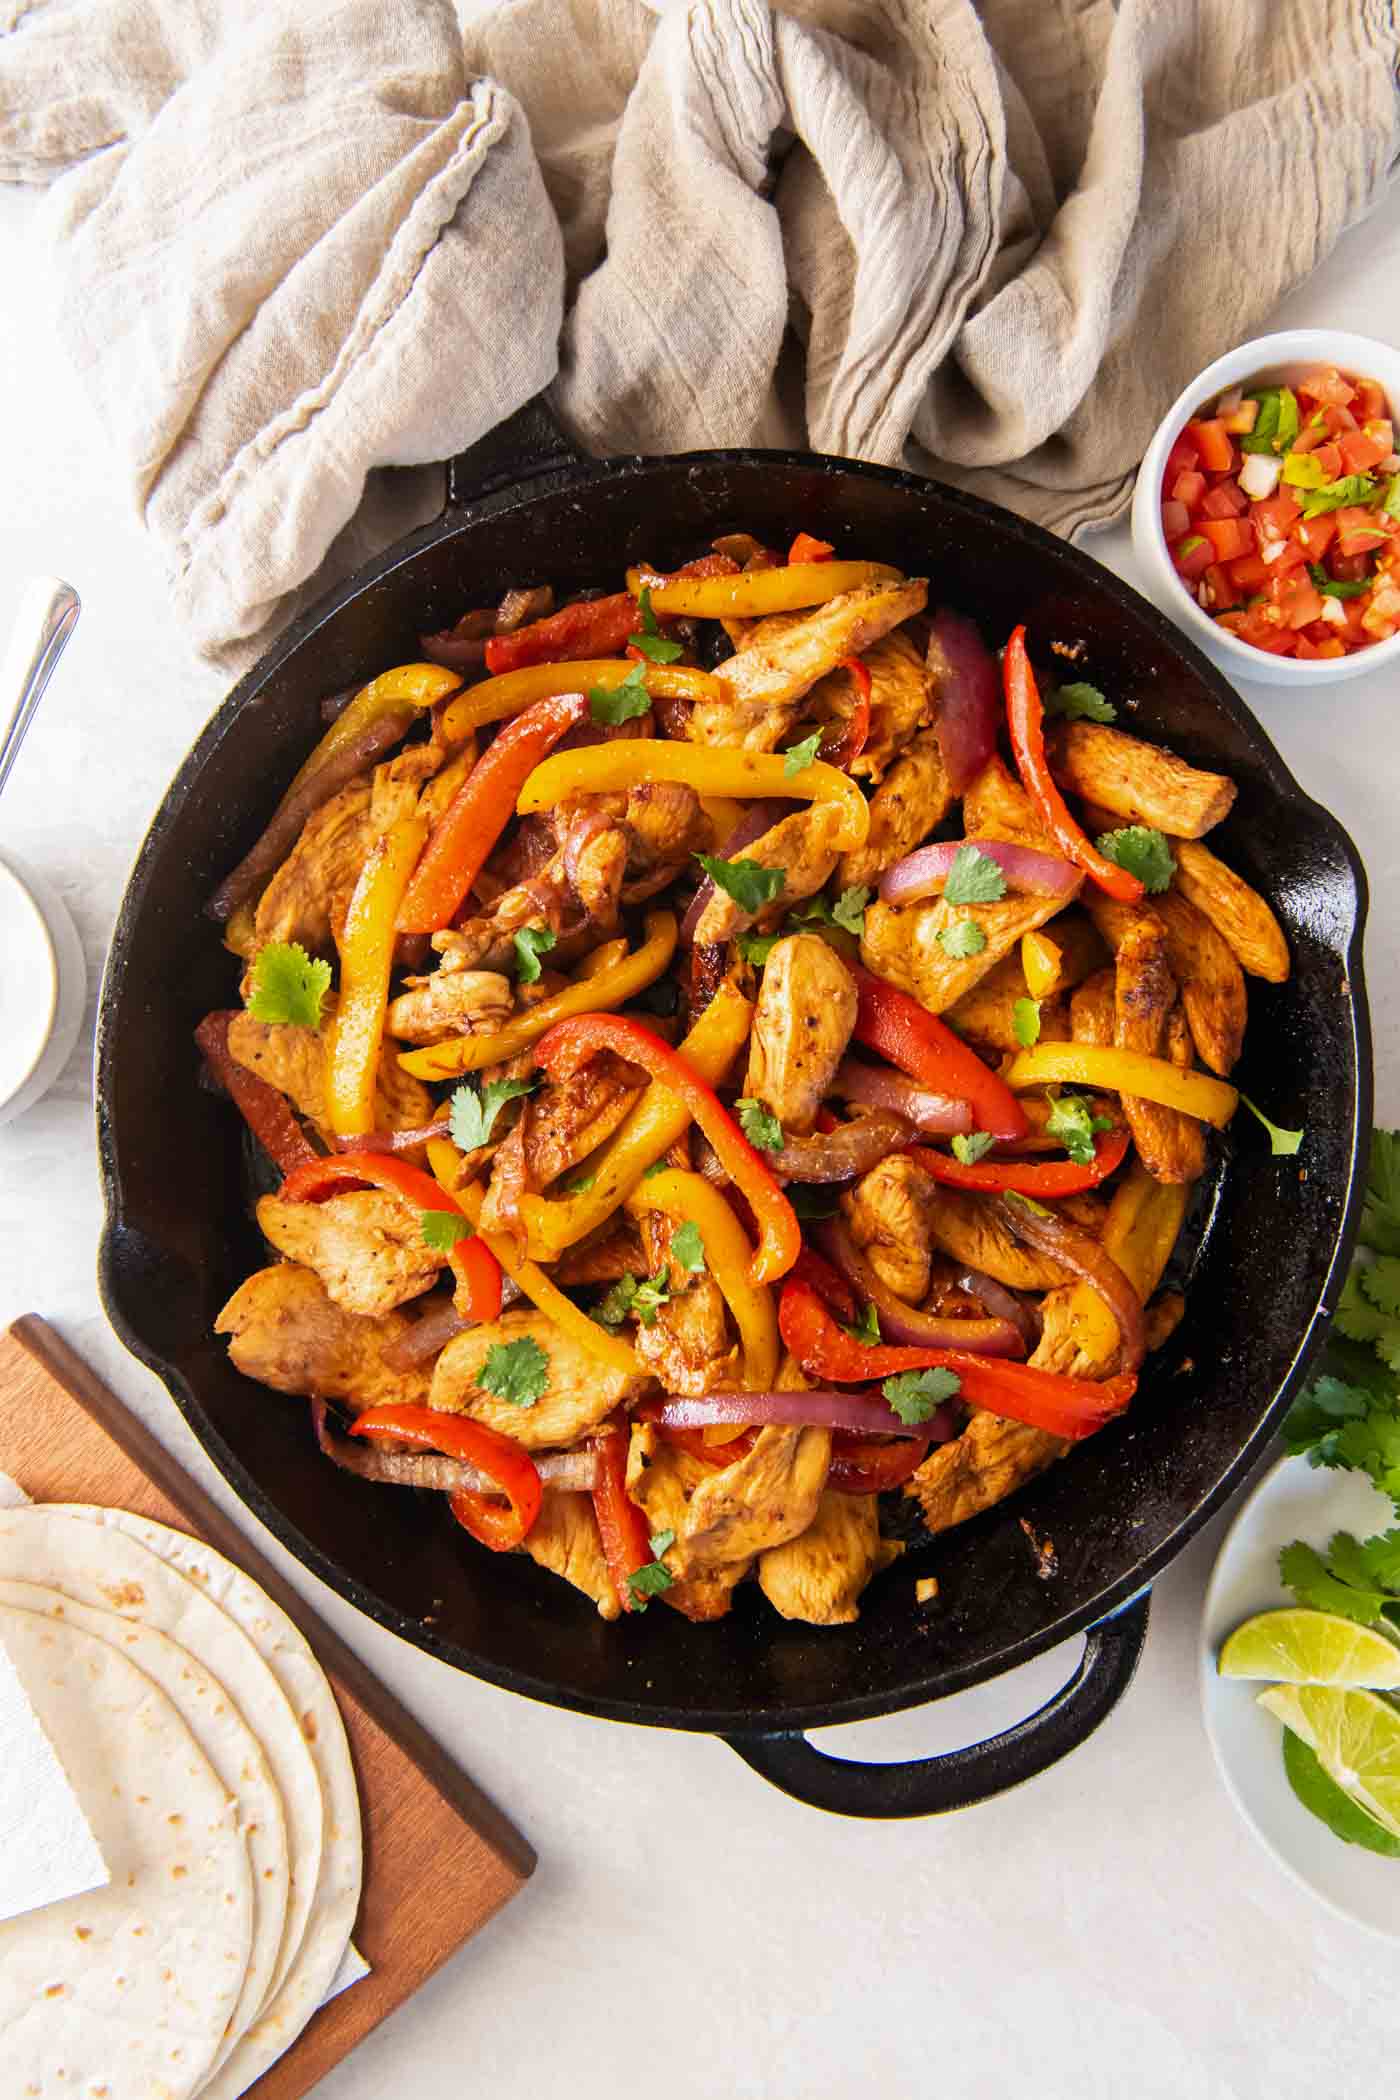 Chicken fajitas in a cast iron skillet with tortillas and fajita toppings around the skillet.